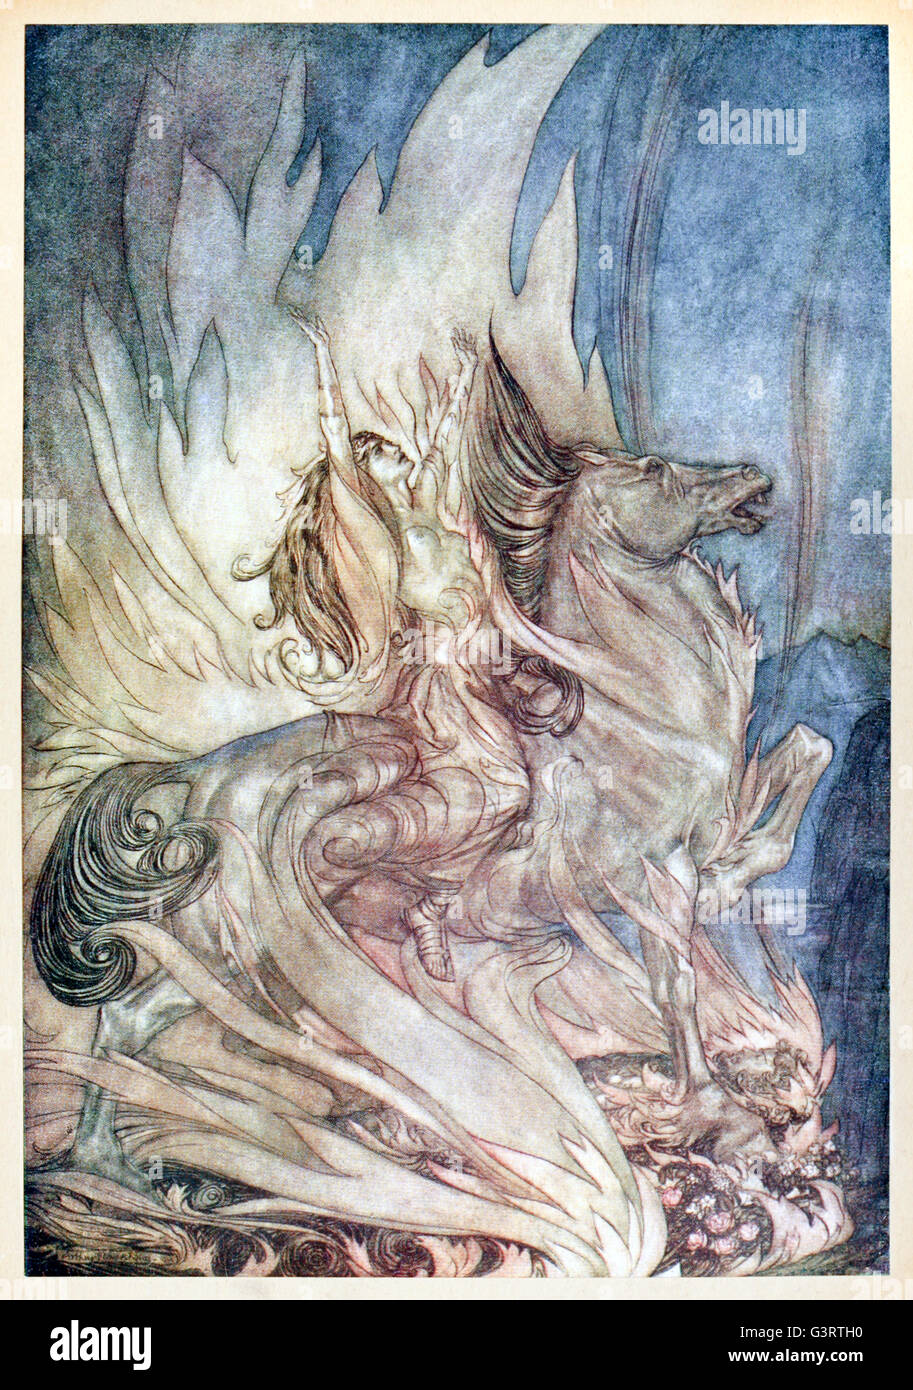 “Brunnhilde on Grane leaps on to the funeral pyre of Siegfried” from 'Siegfried & The Twilight of the Gods' illustrated by Arthur Rackham (1867-1939). See description for more information. Stock Photo